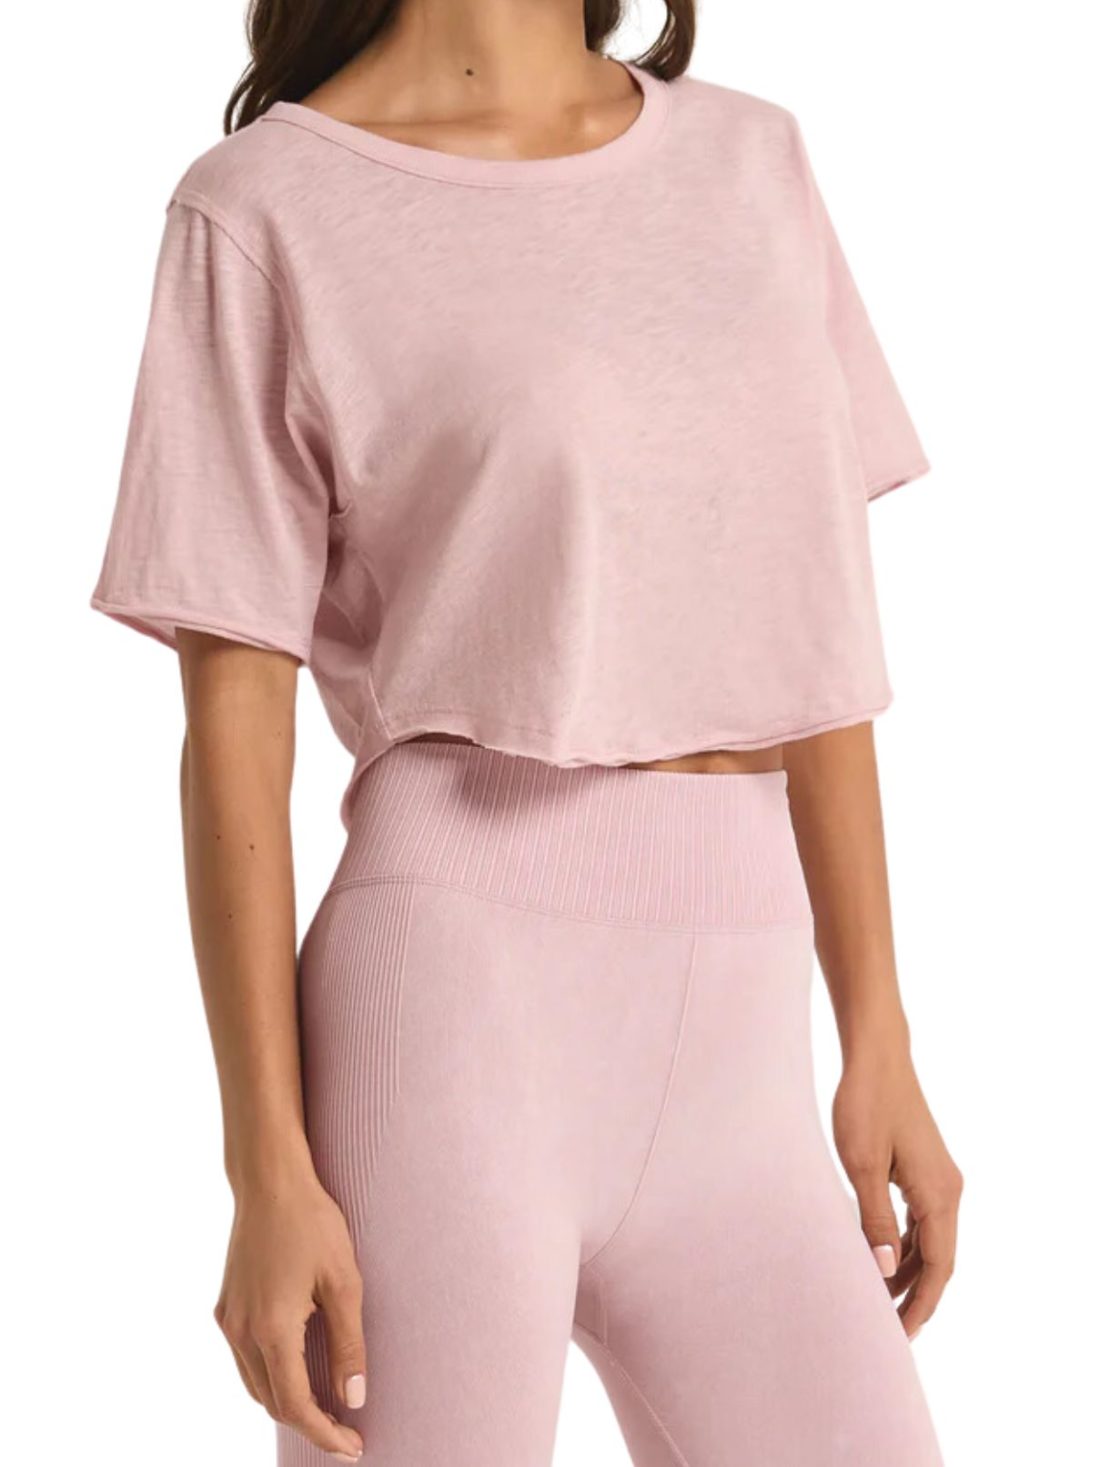 z supply free flowing tee in passion pink